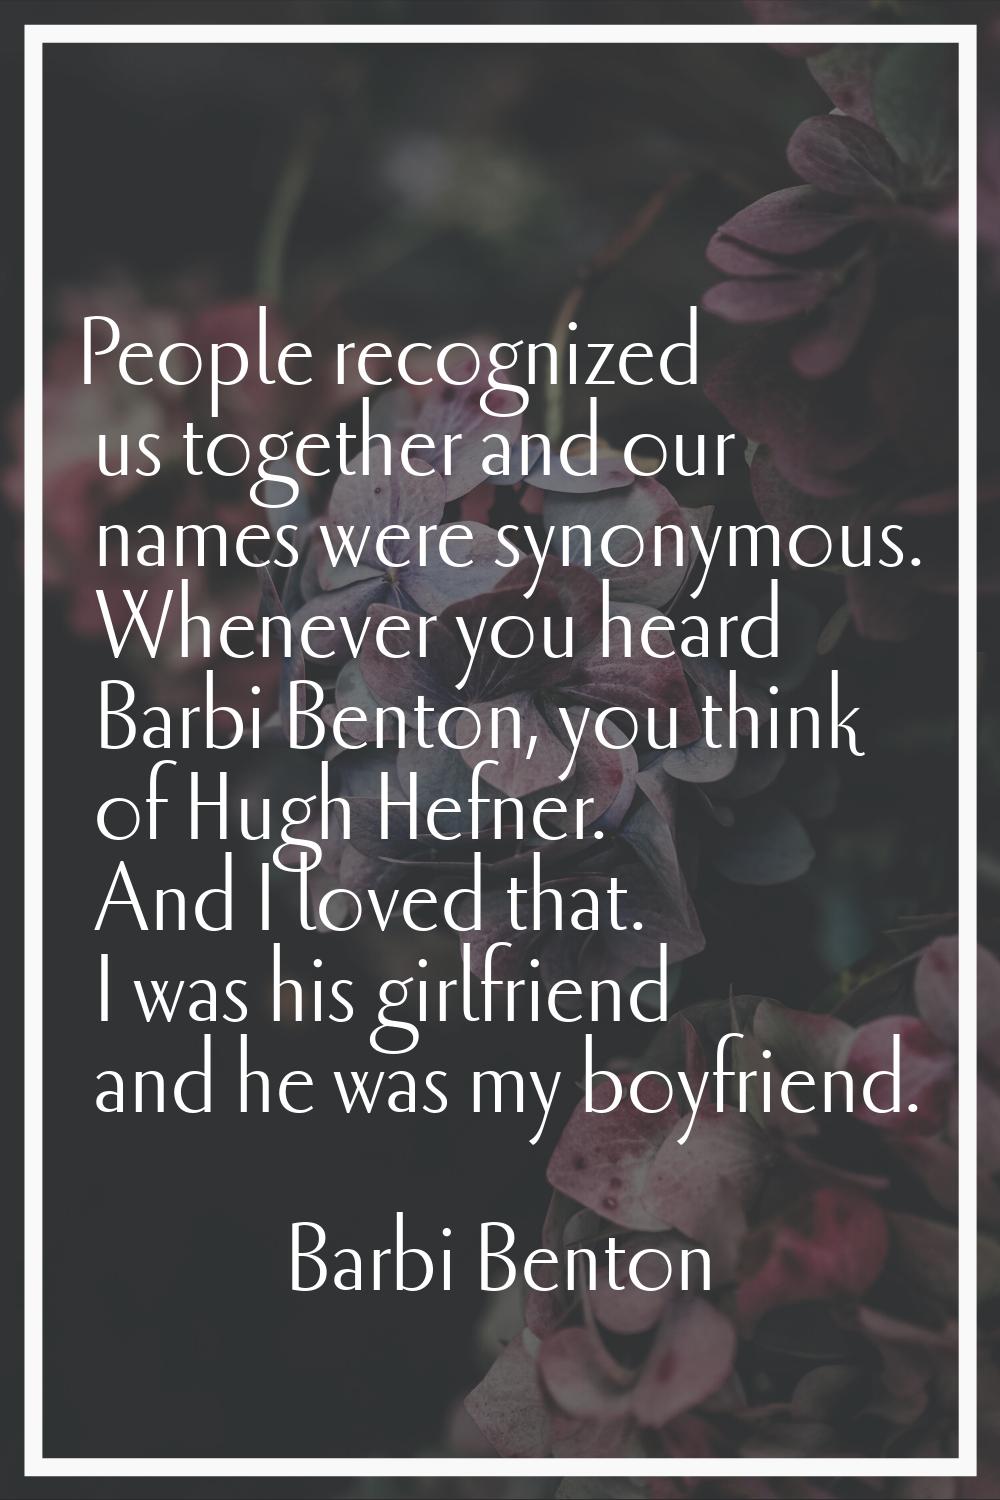 People recognized us together and our names were synonymous. Whenever you heard Barbi Benton, you t